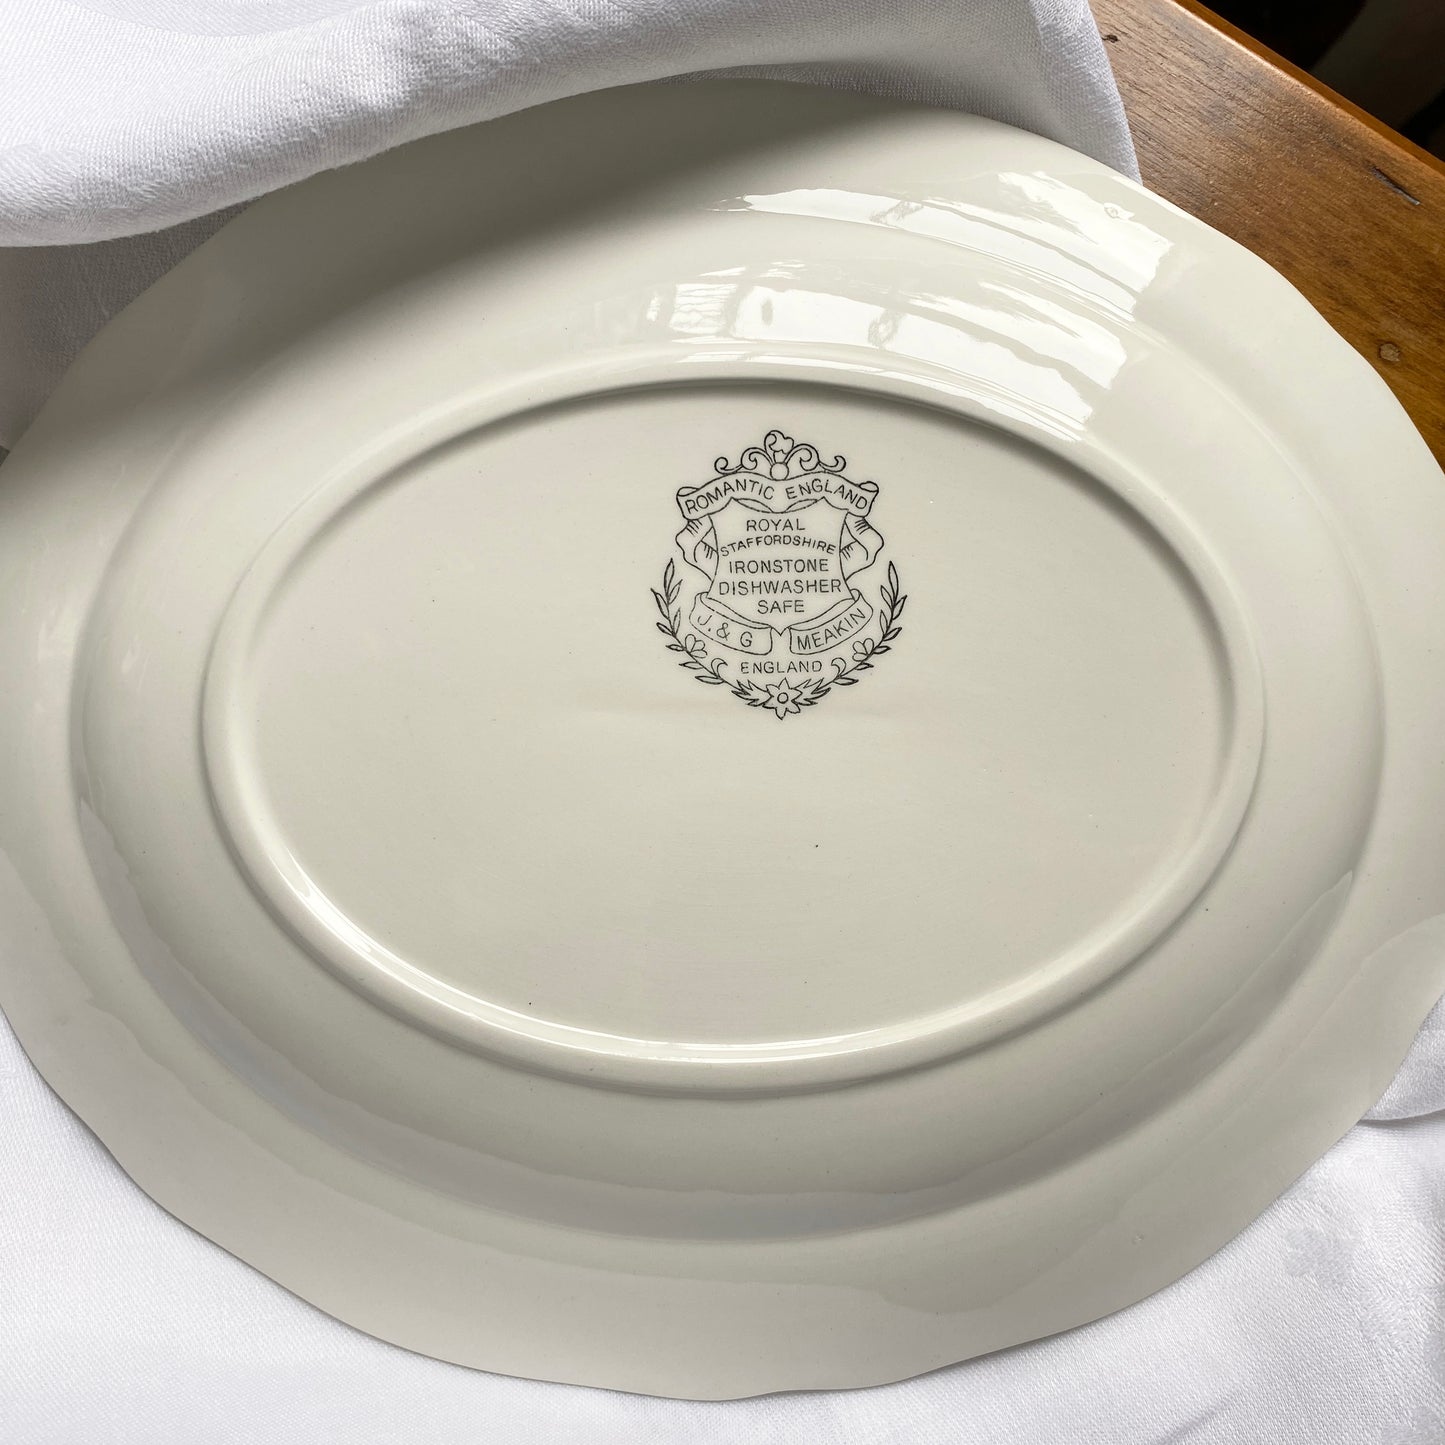 Romantic England Ironstone Dishes by J&G Meakin / Royal Staffordshire